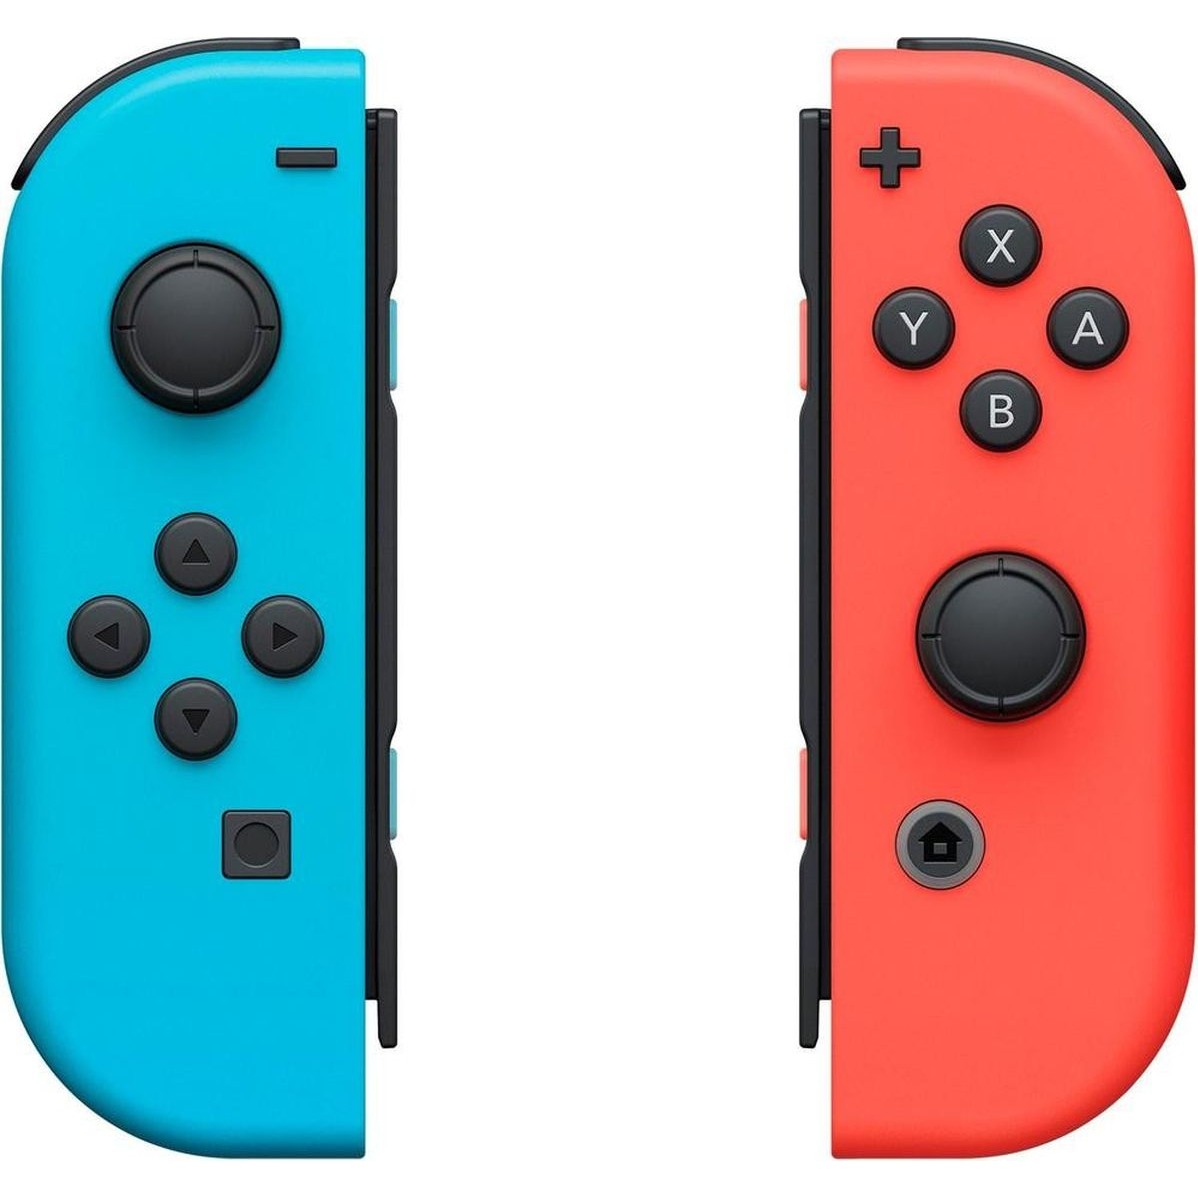 Nintendo Switch(TM) With Neon Blue And Neon Red Joy?Con(TM)＿並行輸入  PC用ゲームコントローラー